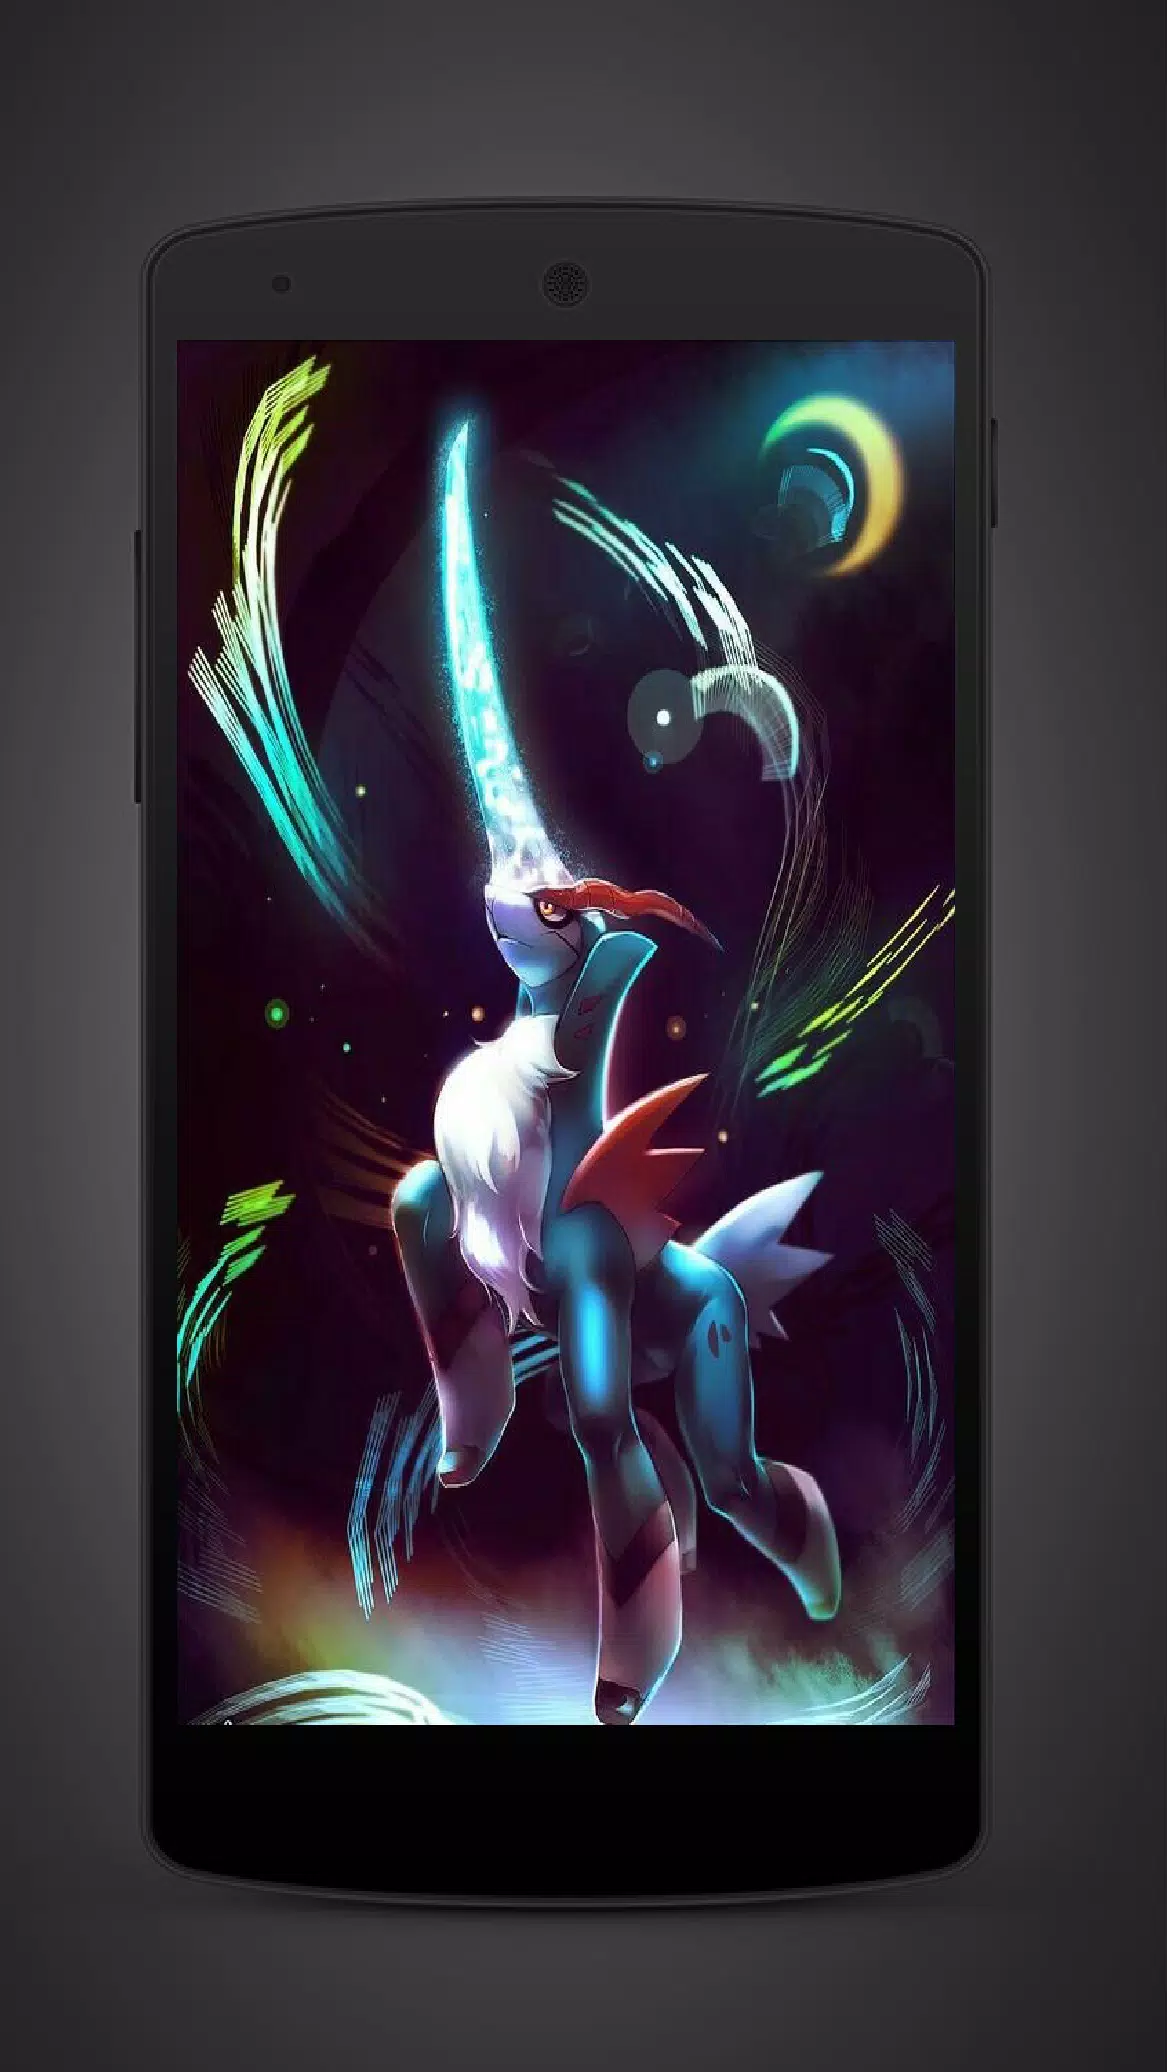 Legendary pokemon wallpapers hd apk for android download